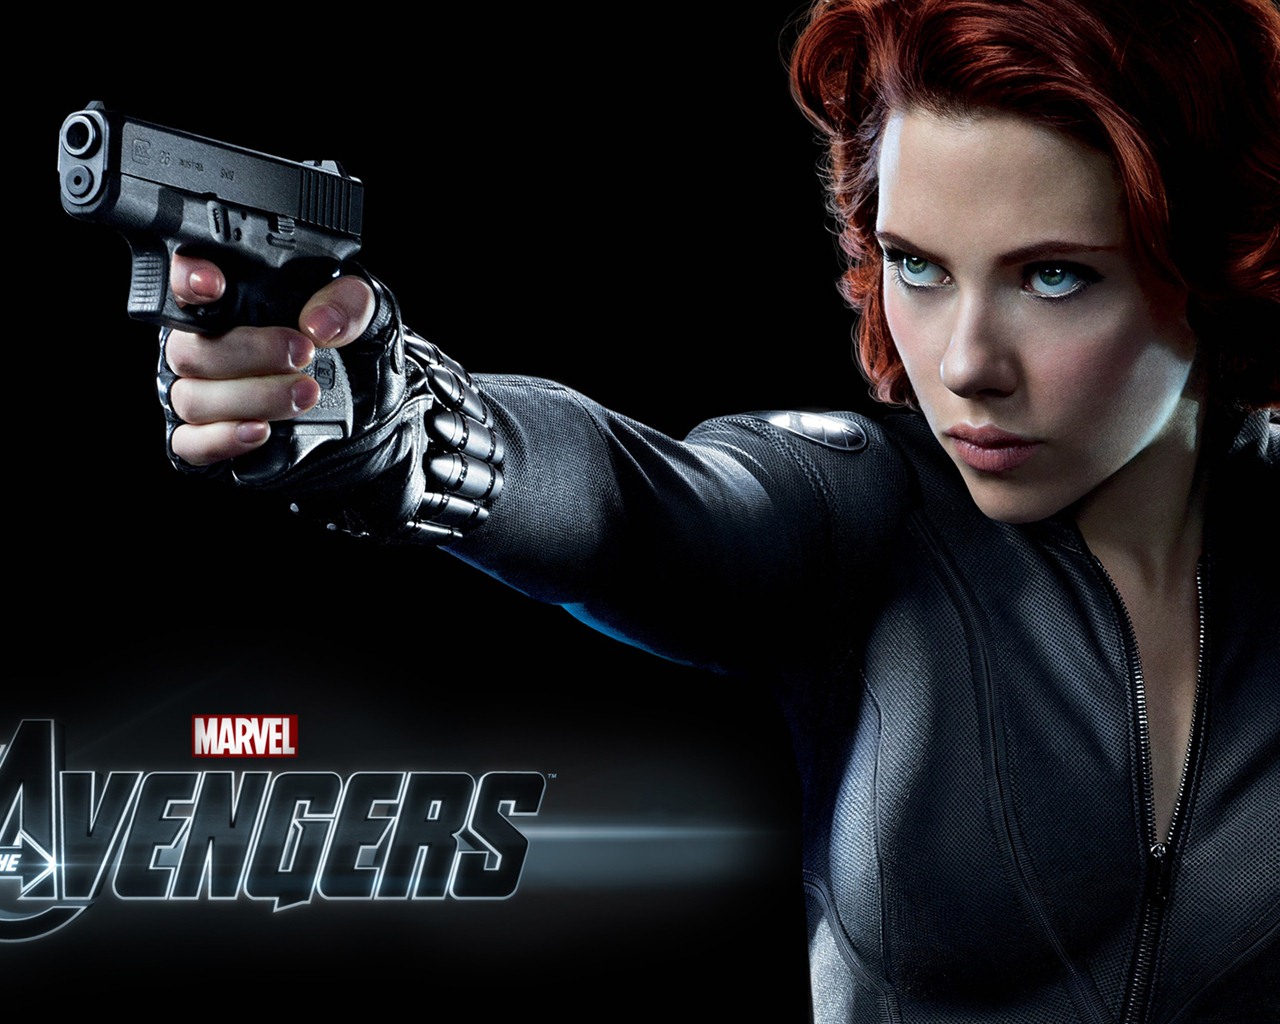 The Avengers 2012 HD wallpapers #11 - 1280x1024